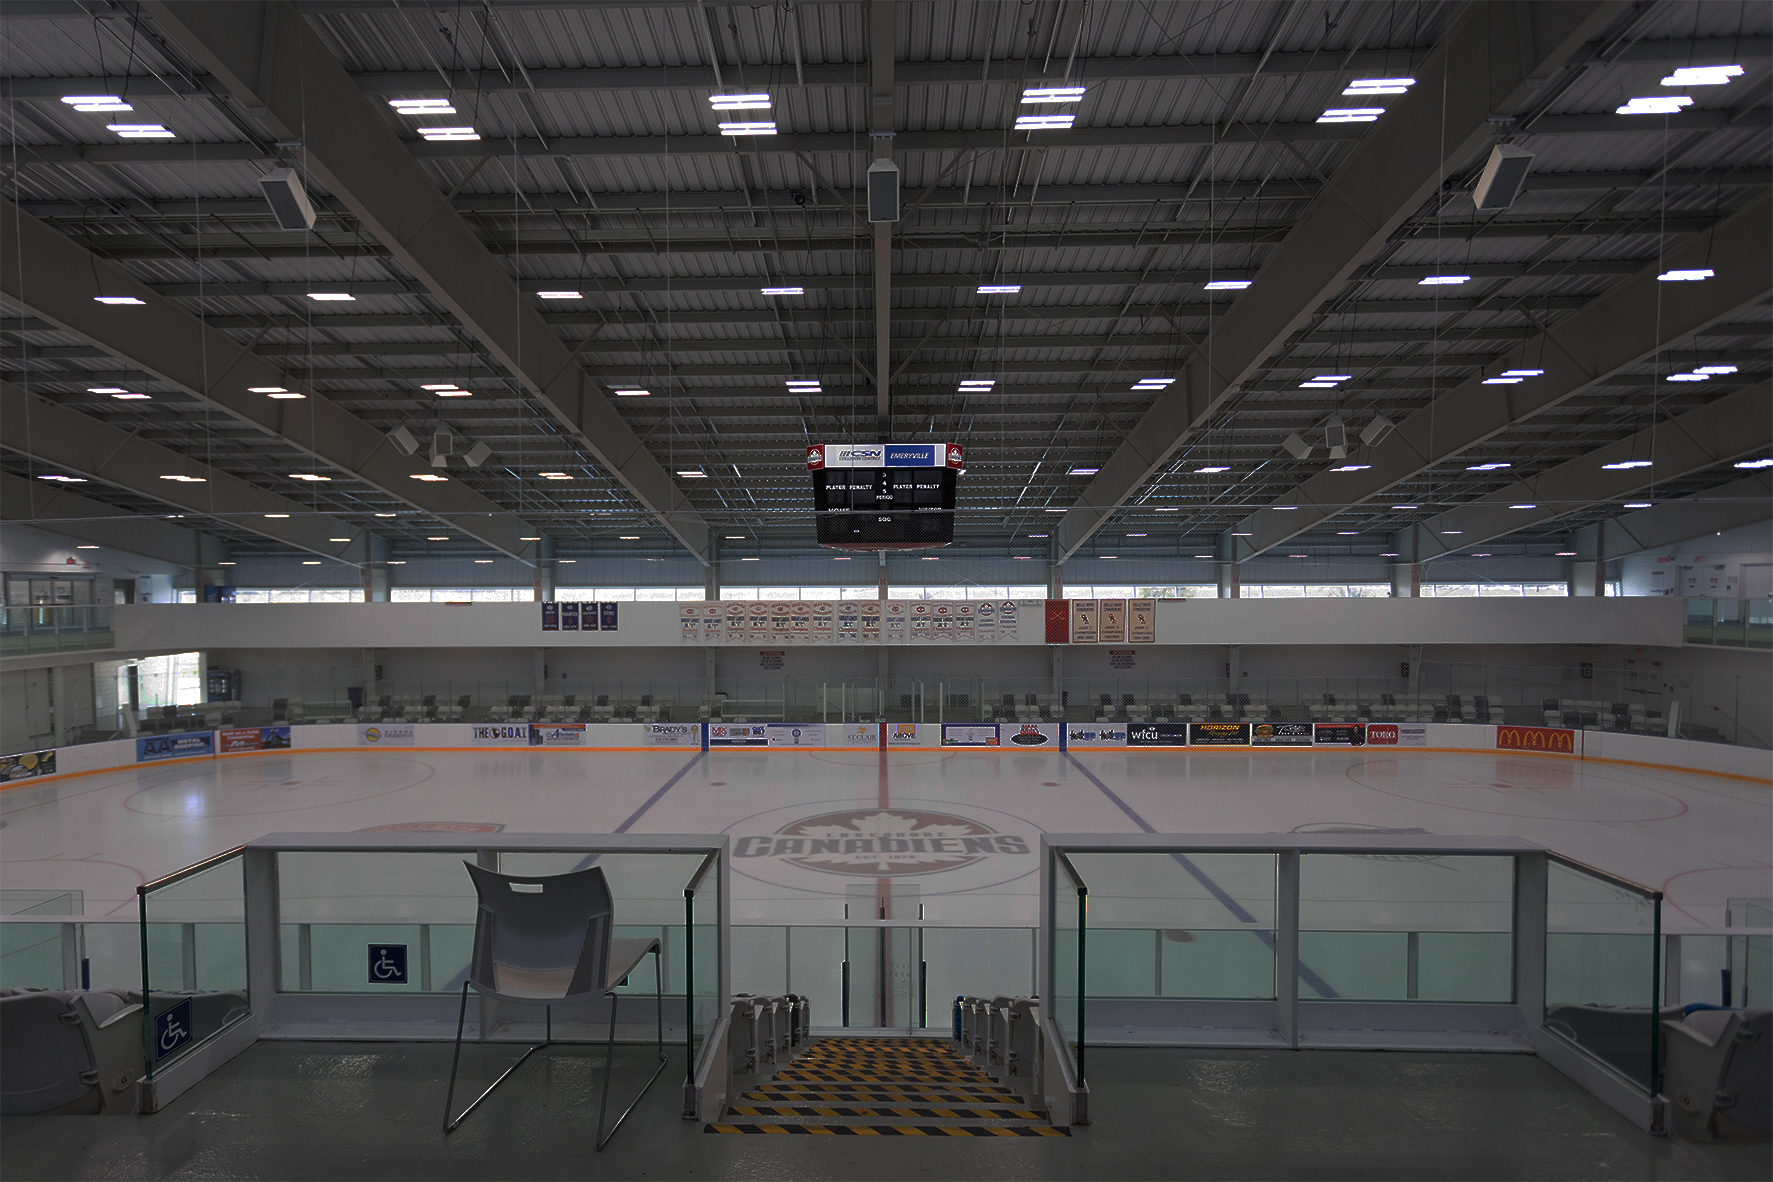 Large ice rink dimly lit surrounded by seating area